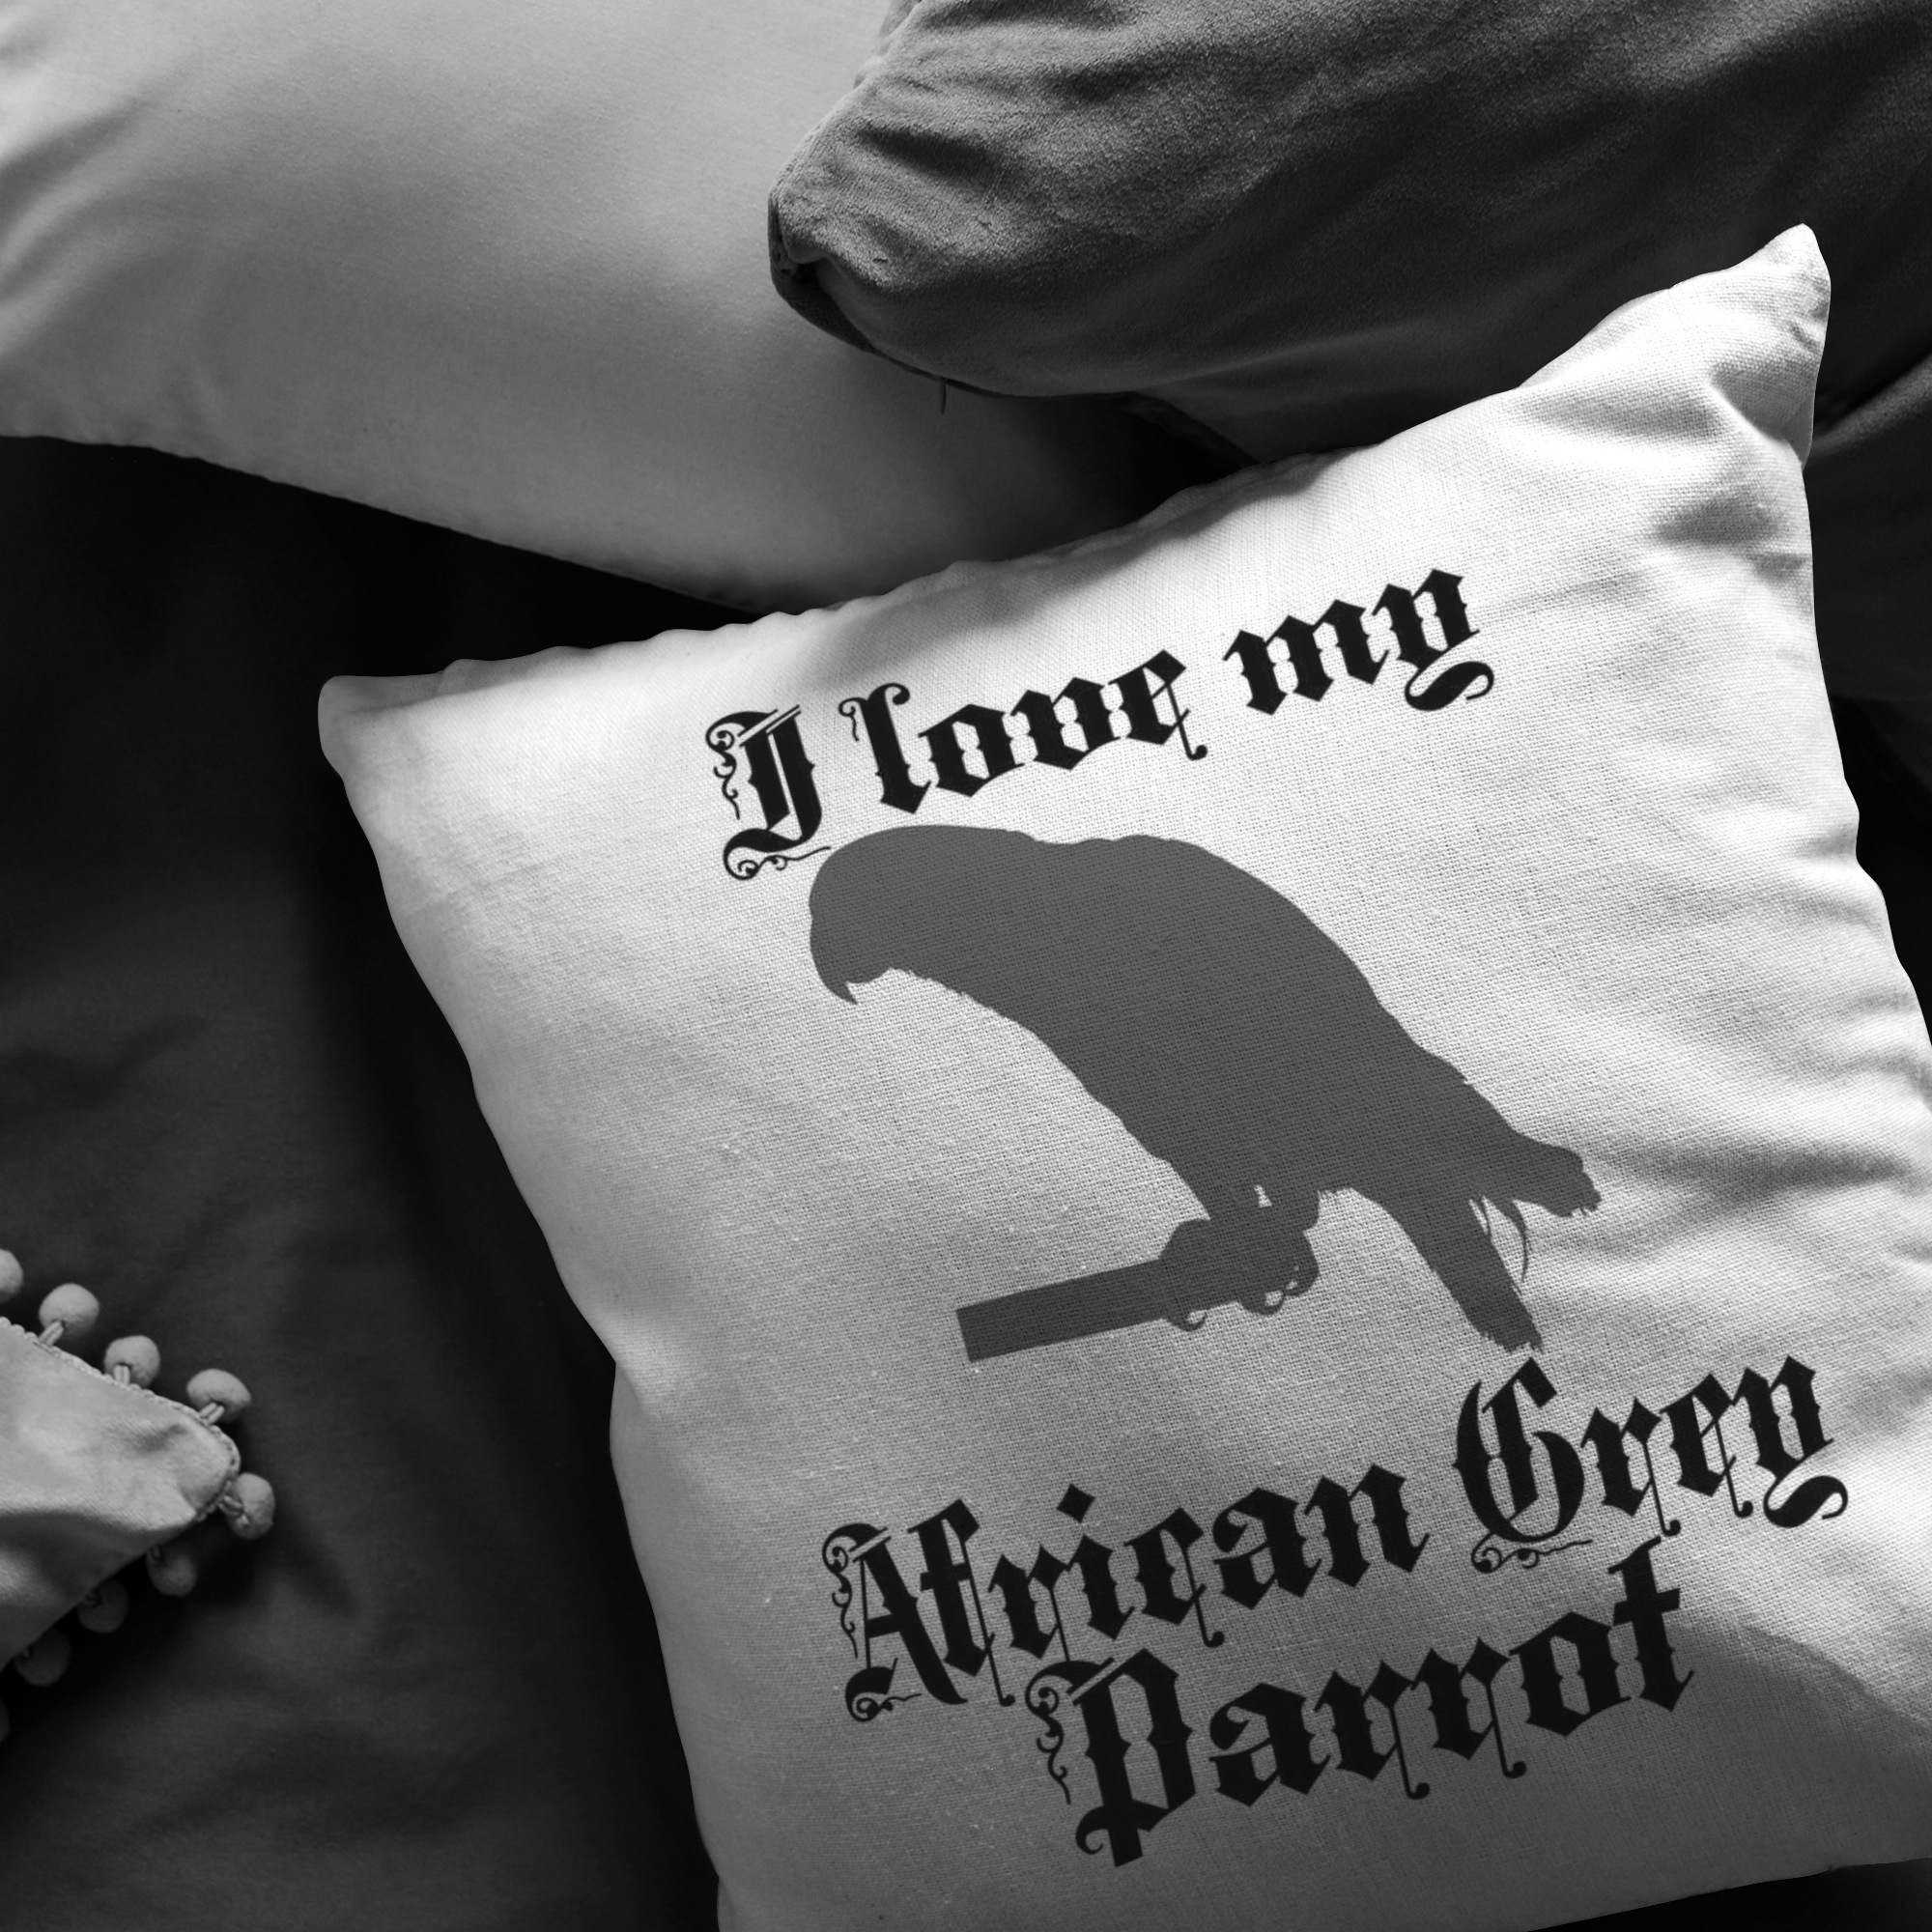 I love my African Grey Parrot - Pillow